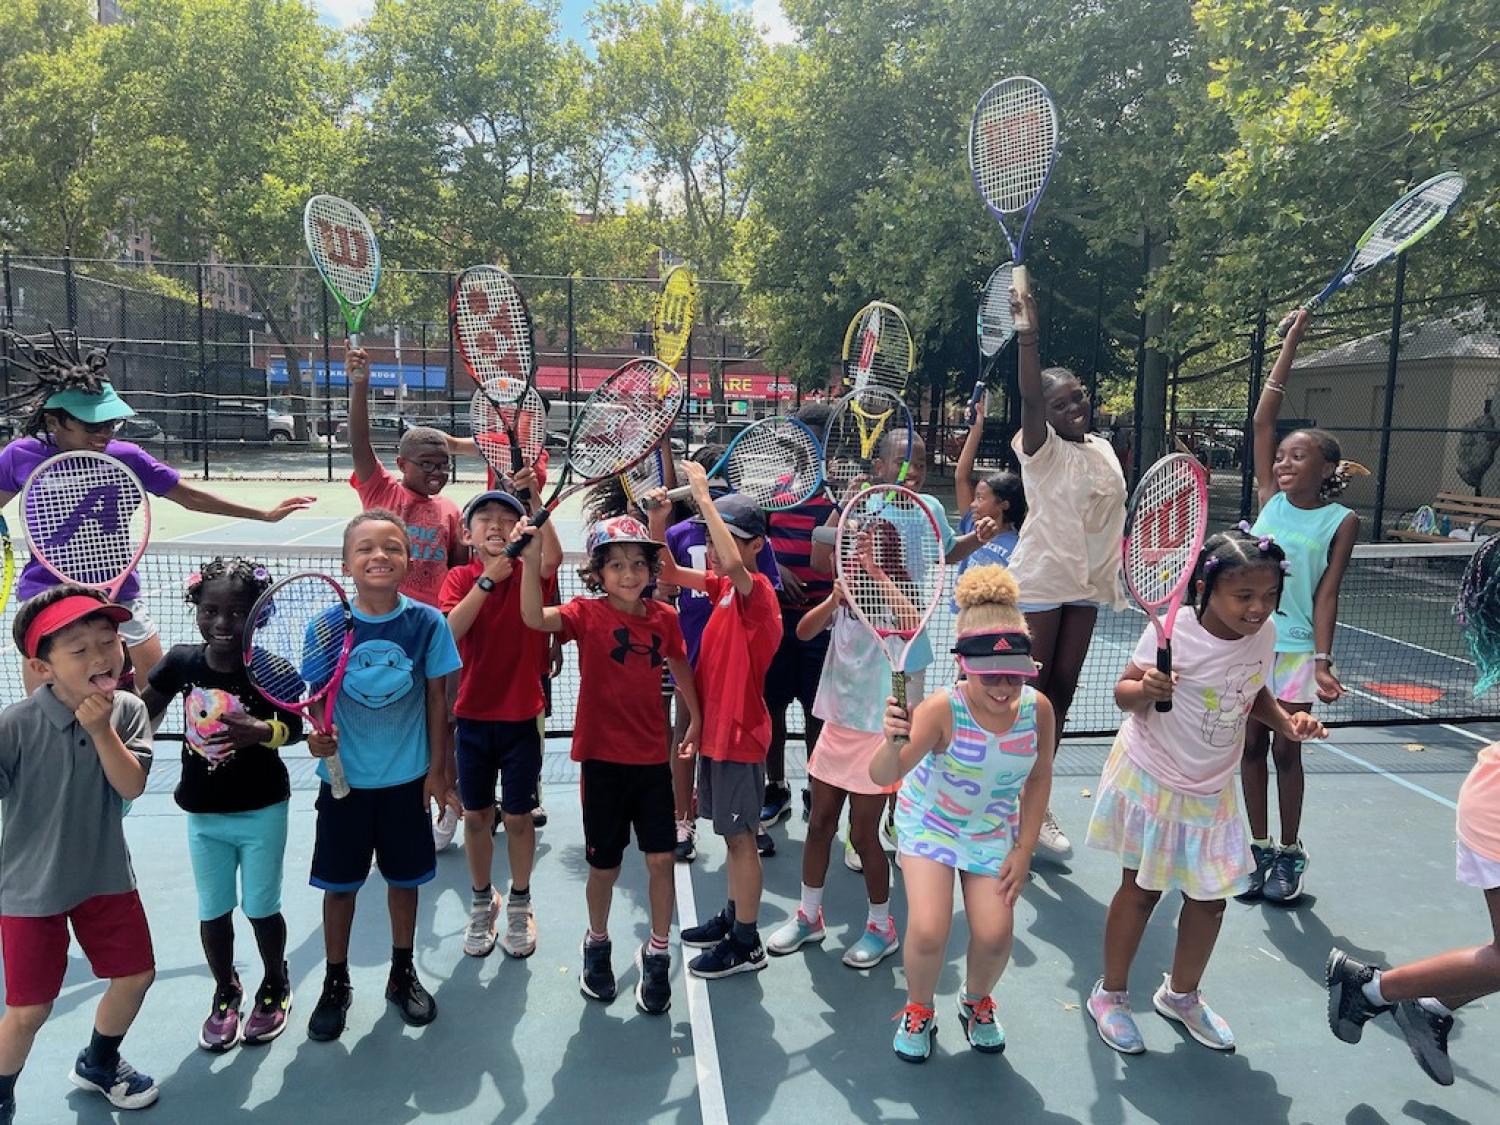 Large group of youth raising their tennis rackets on a sunny date at an outside tennis court